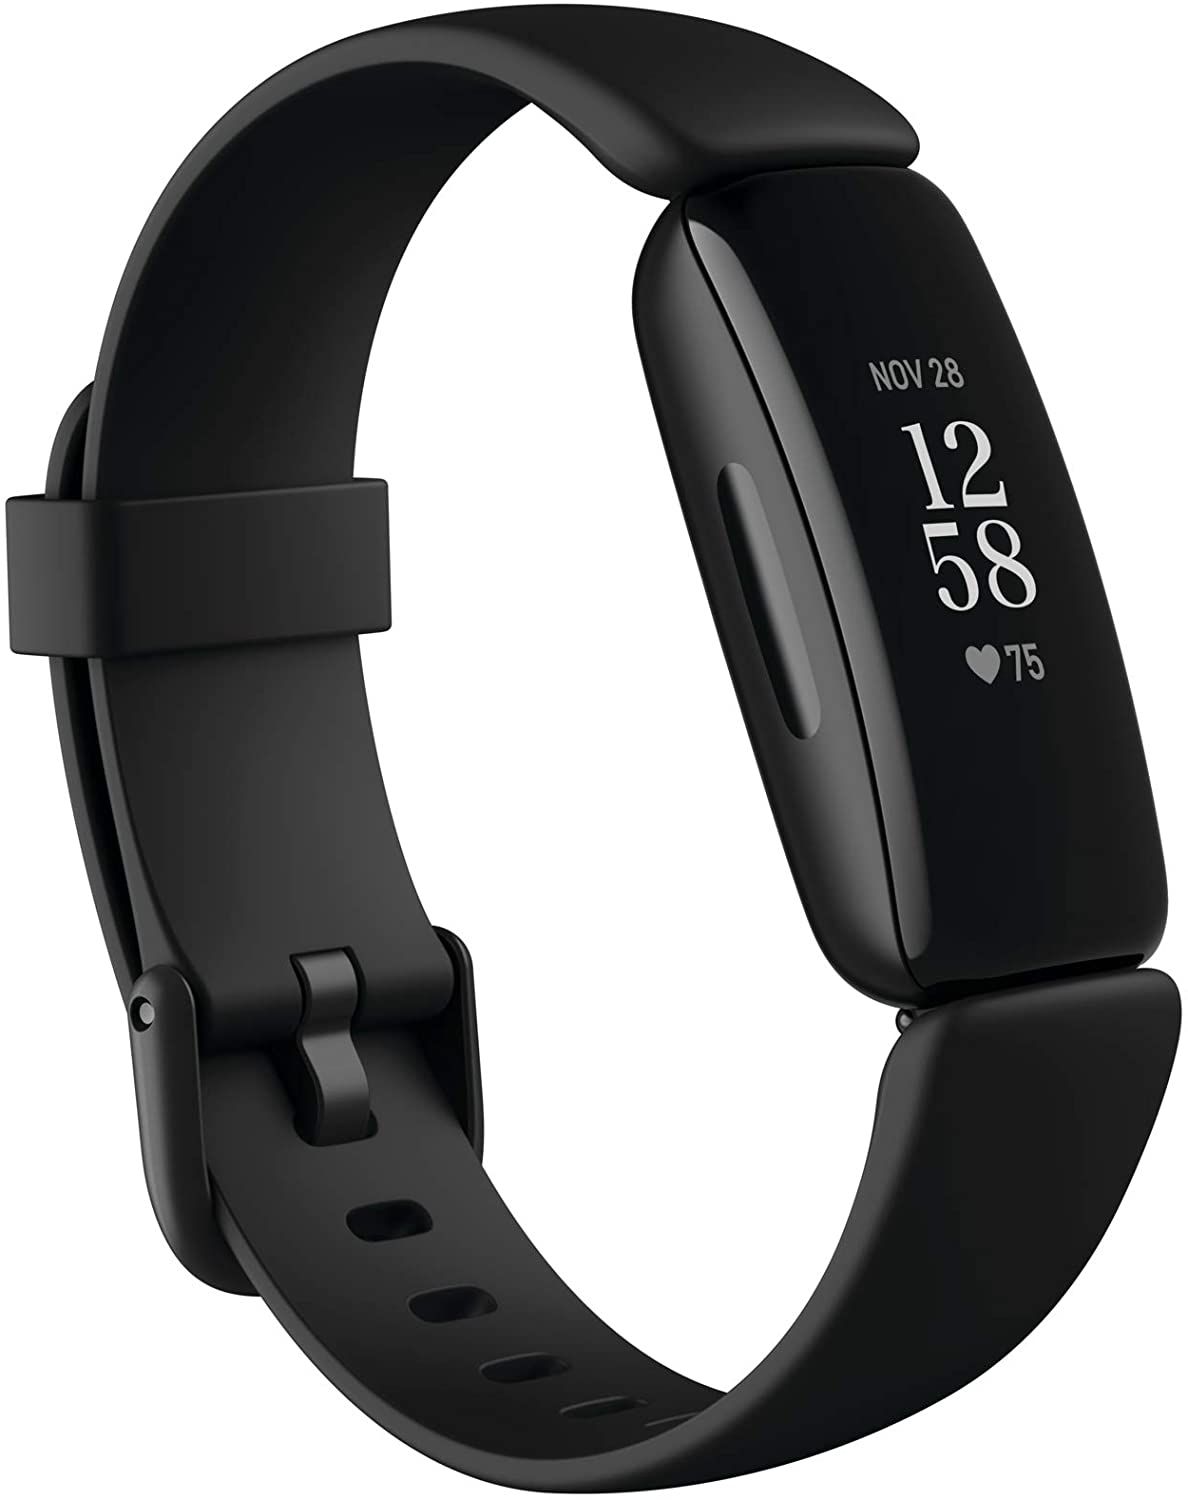 The Fitbit Comparison Which Model Is Best for You?